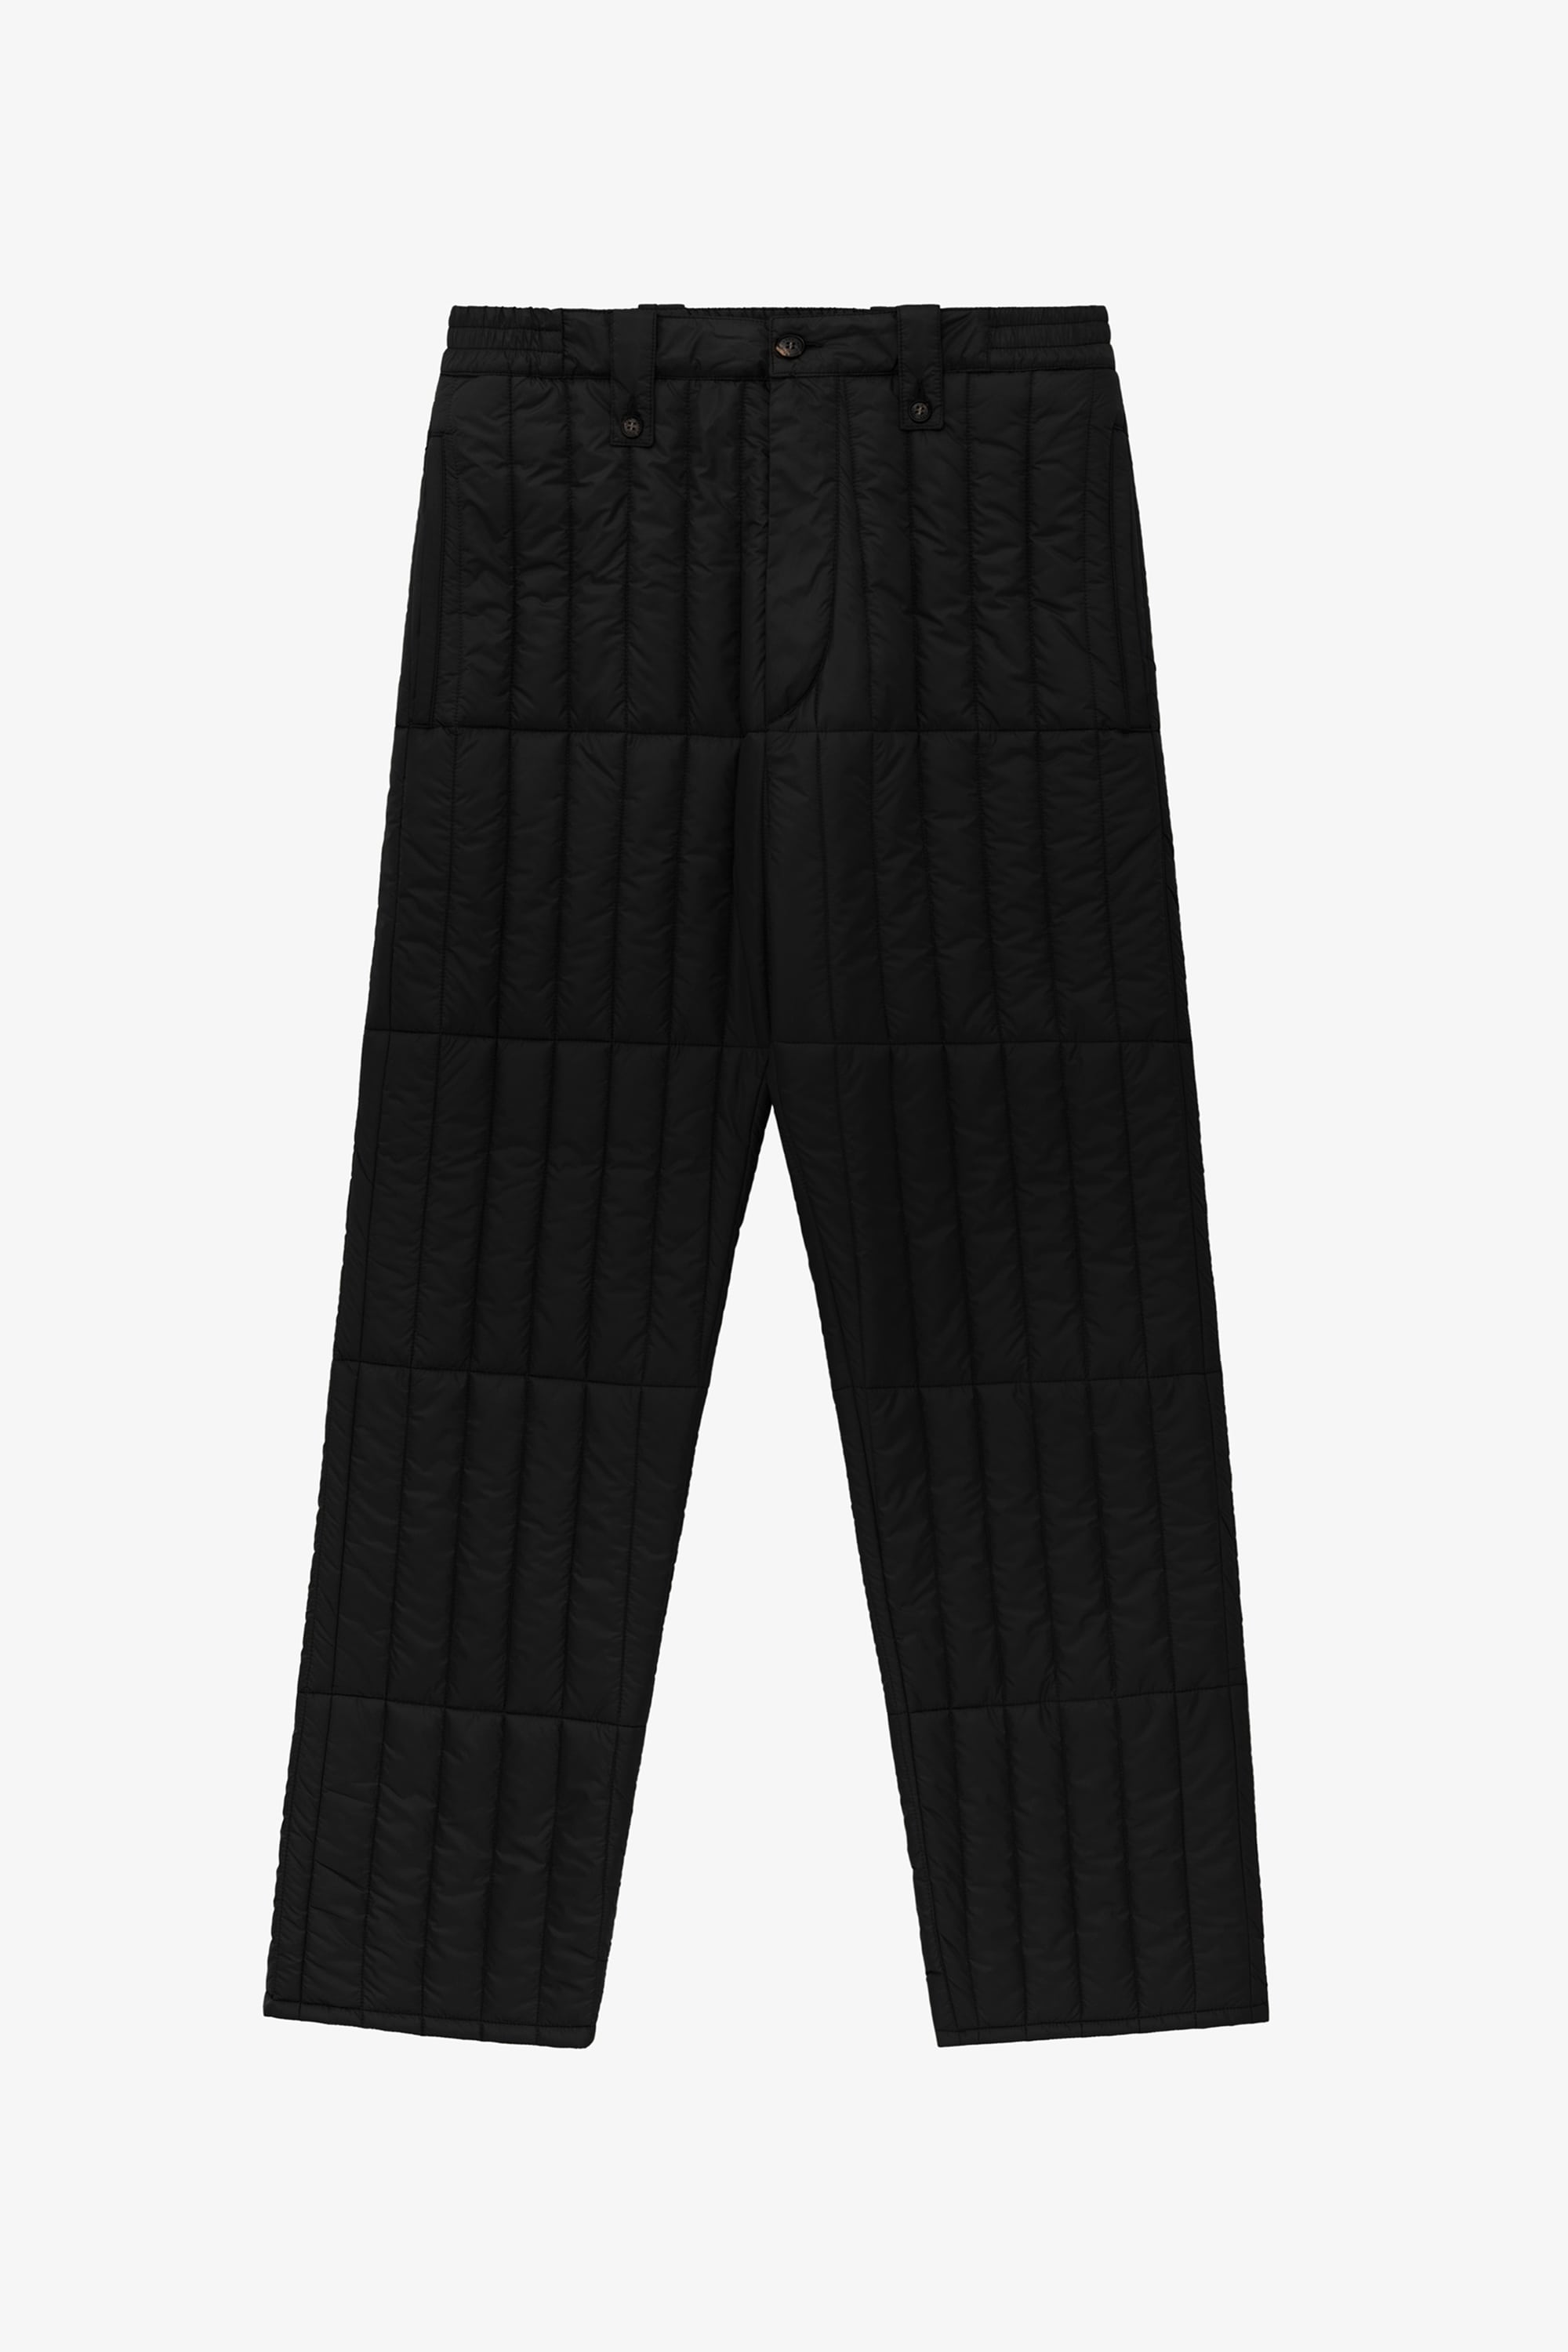 AIMÈ LEON DORE】FILLED PANTS｜WOOLRICH（ウールリッチ）公式 